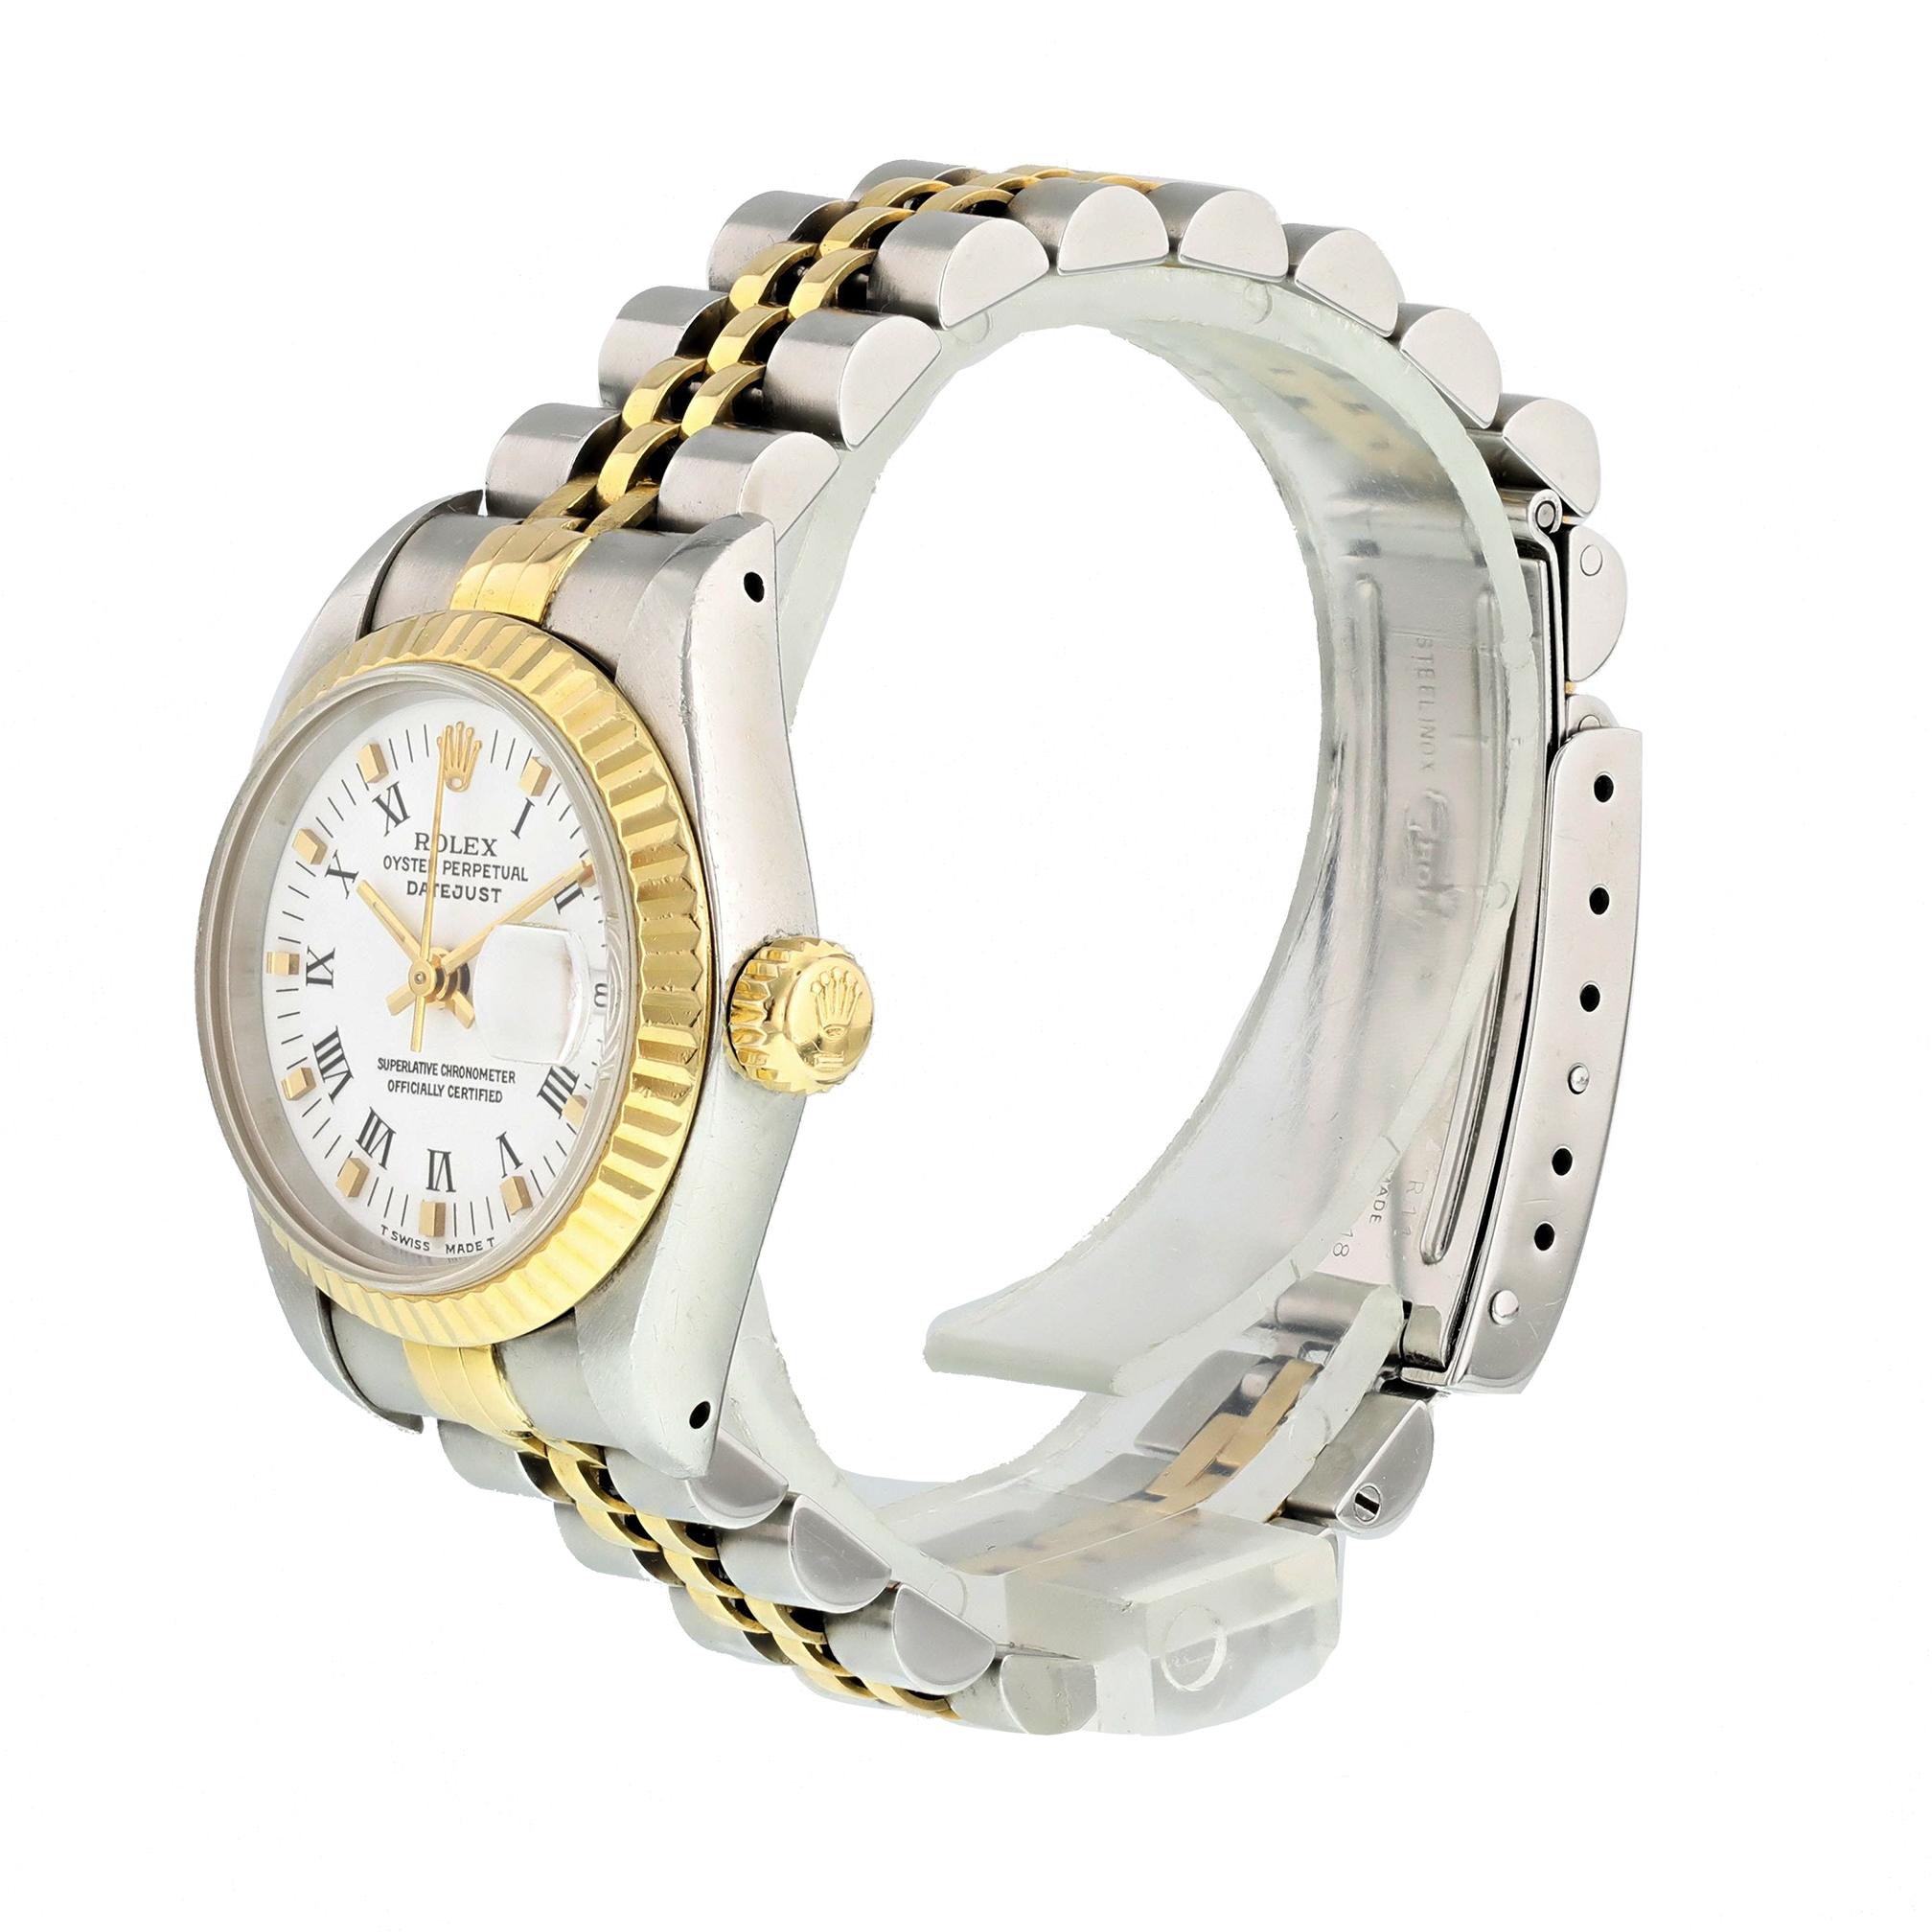 Rolex Datejust Professional 69173 Ladies Watch. 
26mm Stainless Steel case. 
Yellow Gold Stationary bezel. 
White dial with Luminous gold hands and roman numeral hour markers. 
Minute markers on the outer dial. 
Date display at the 3 o'clock